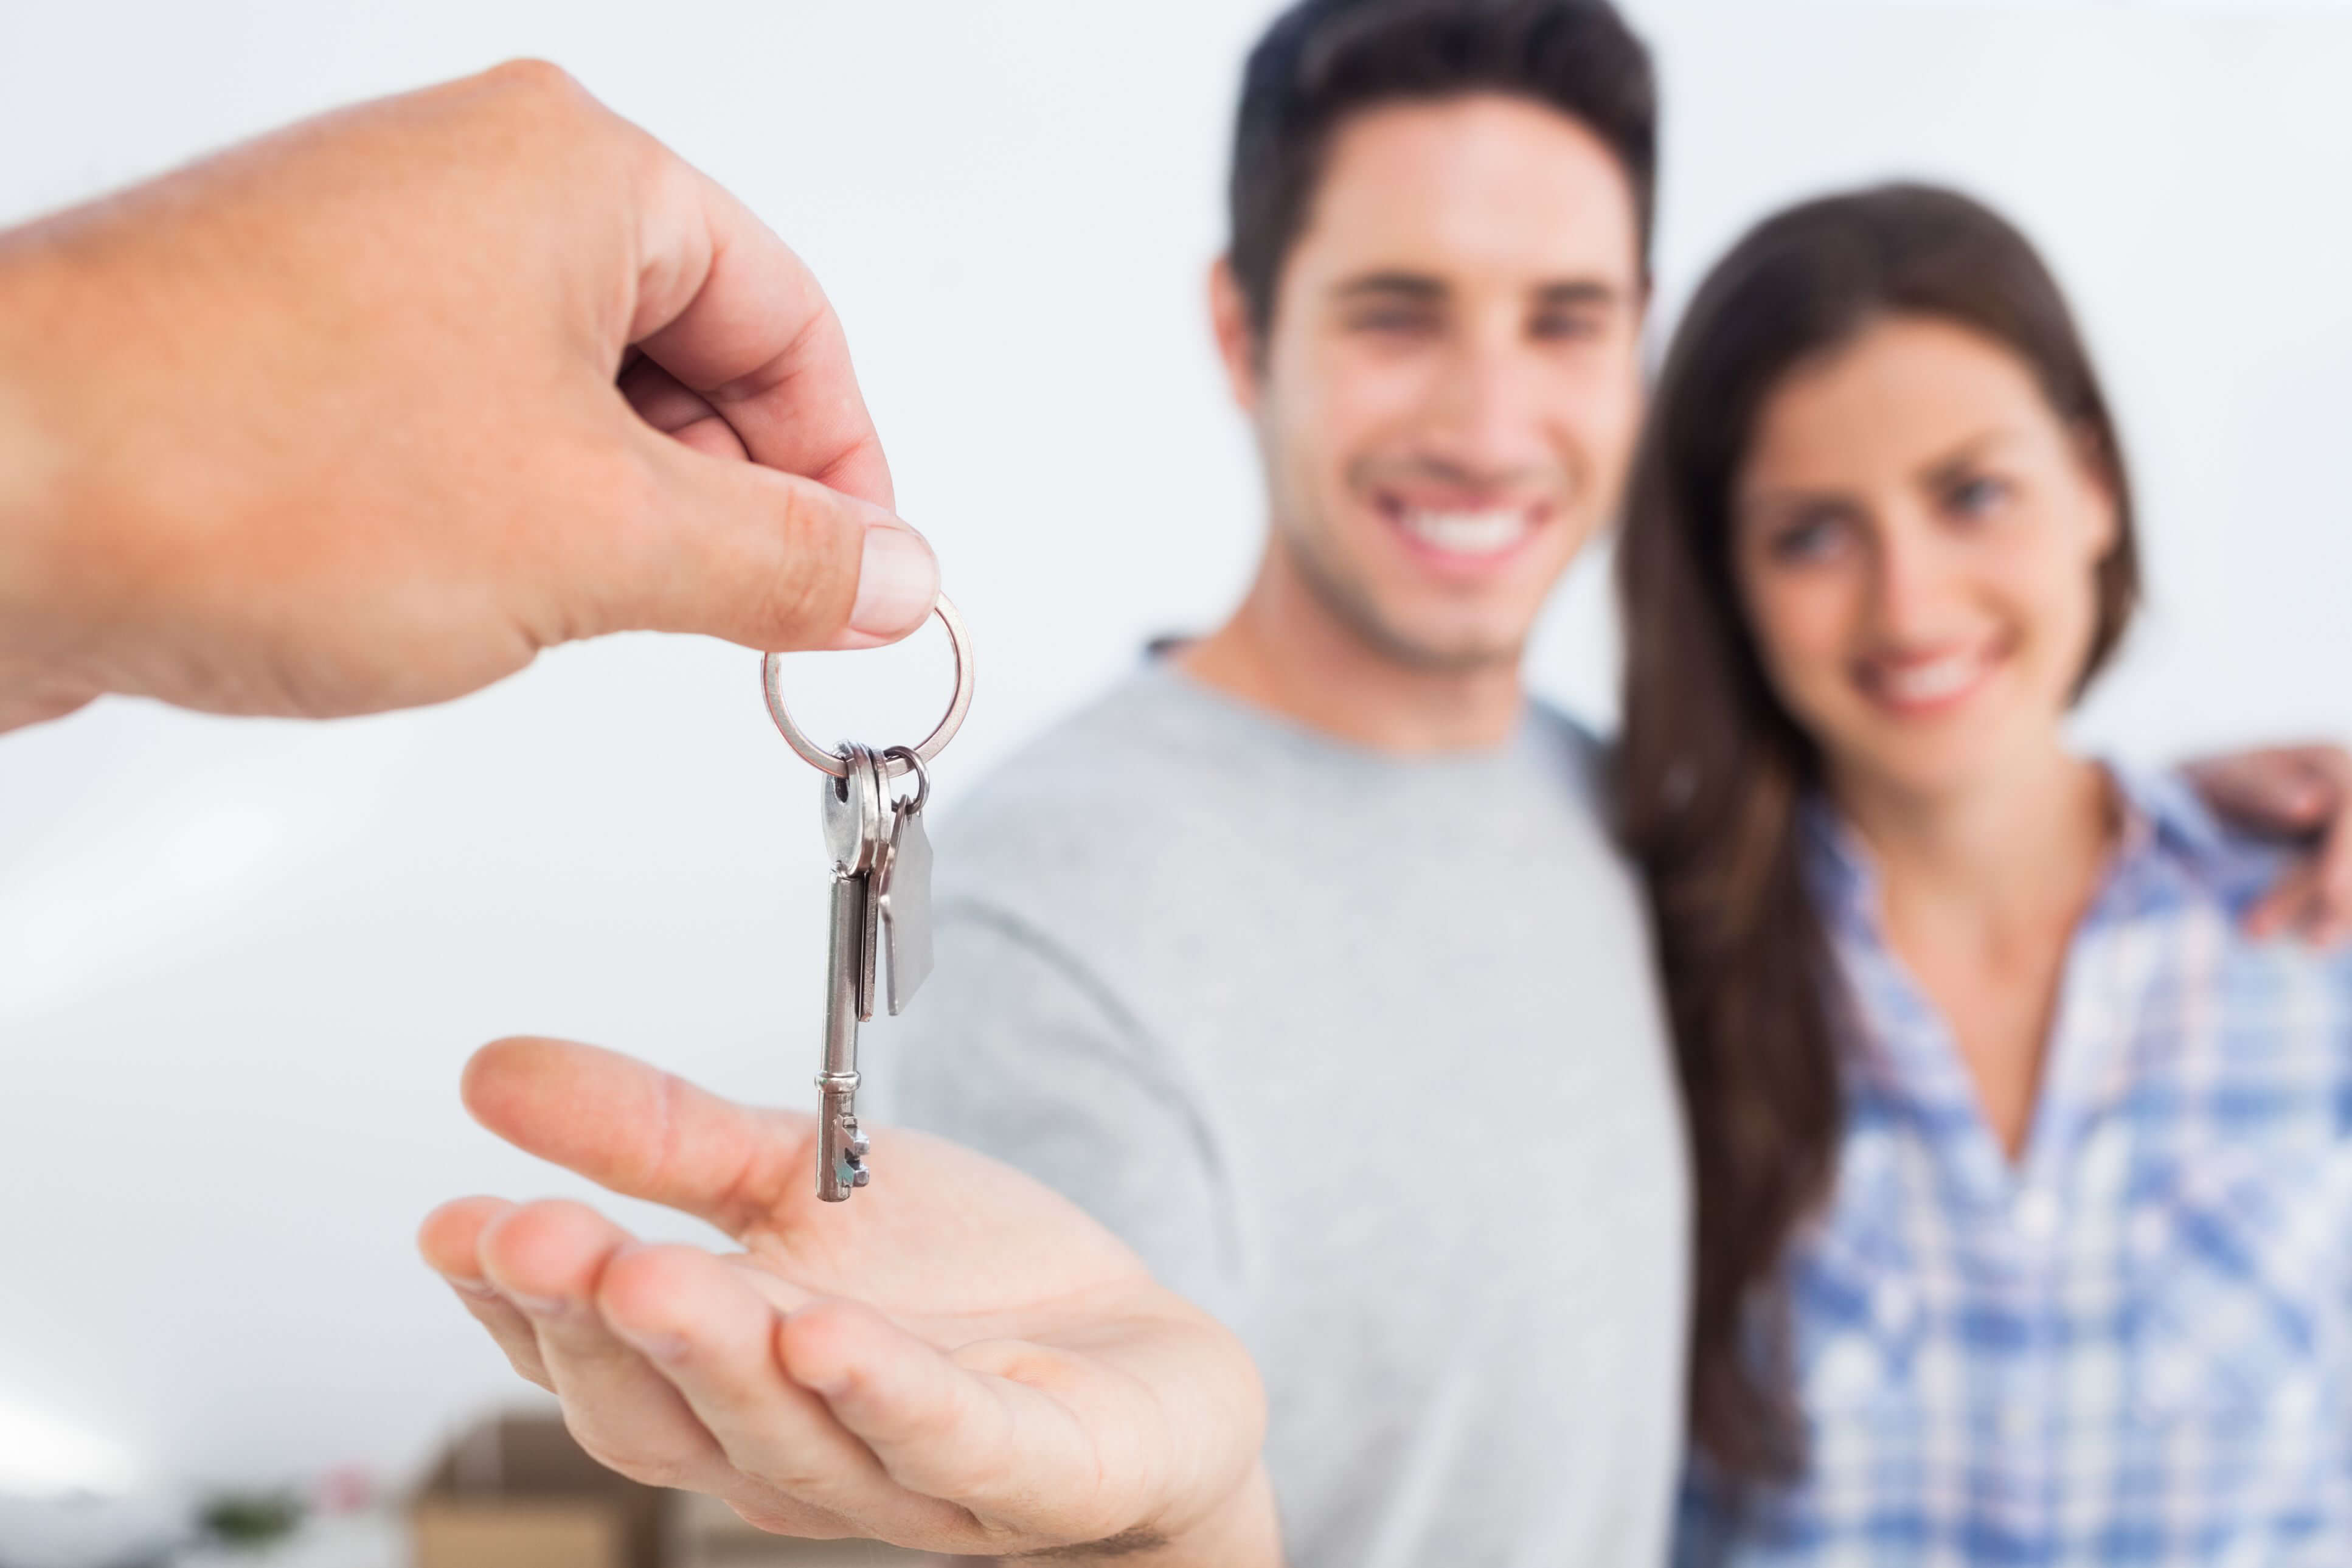 First Home Buyers